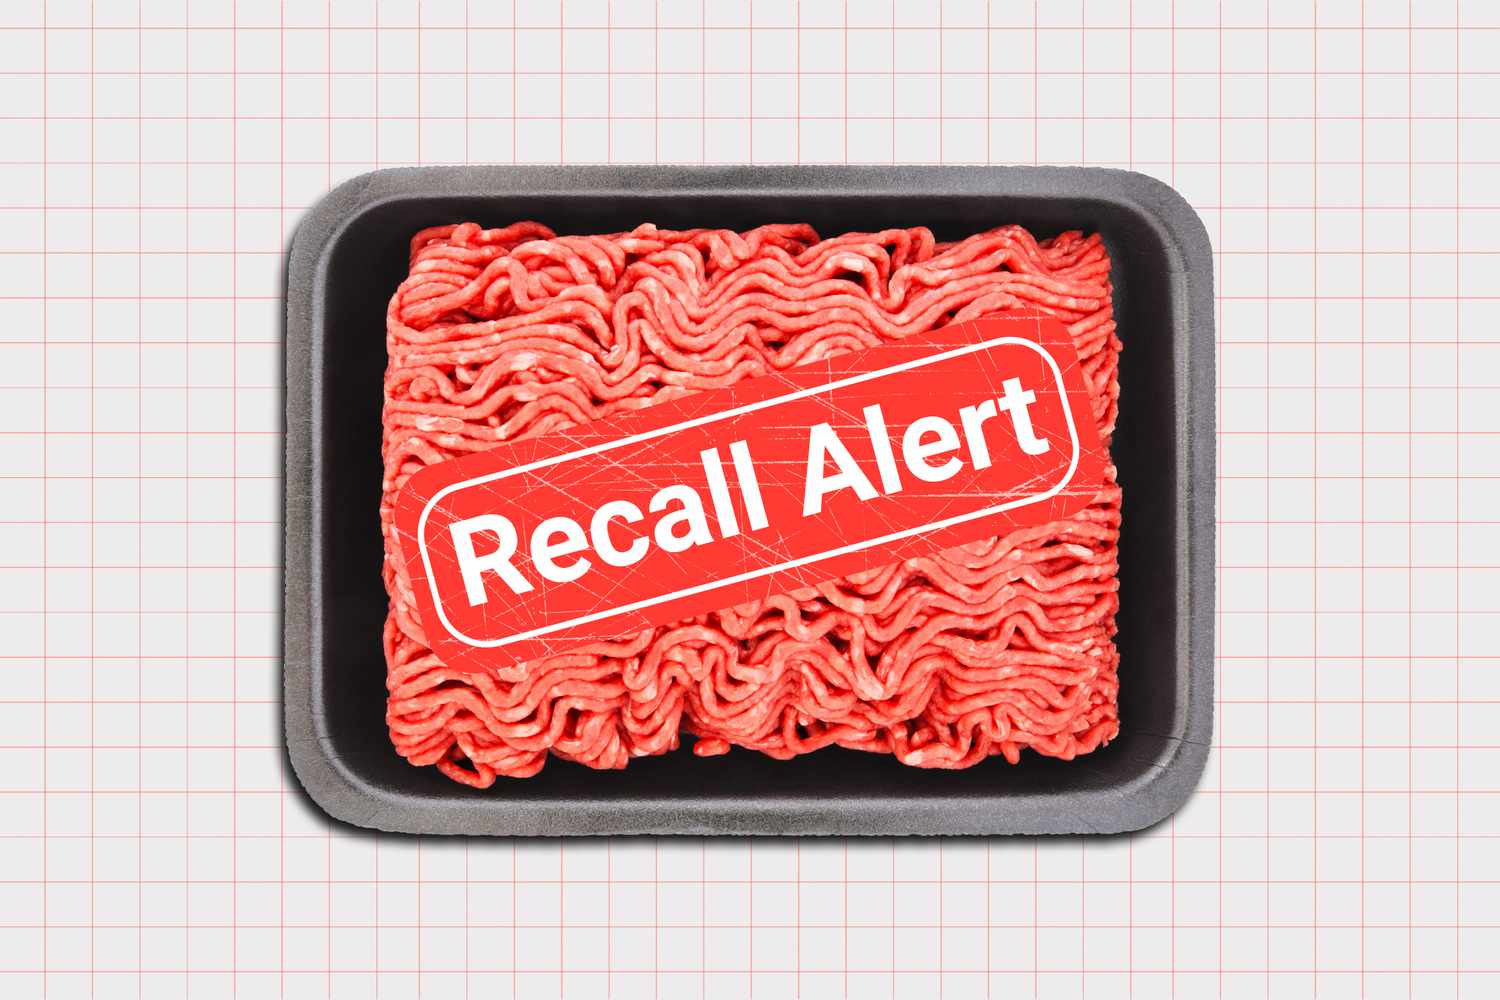 Ground beef with a recall alert over it